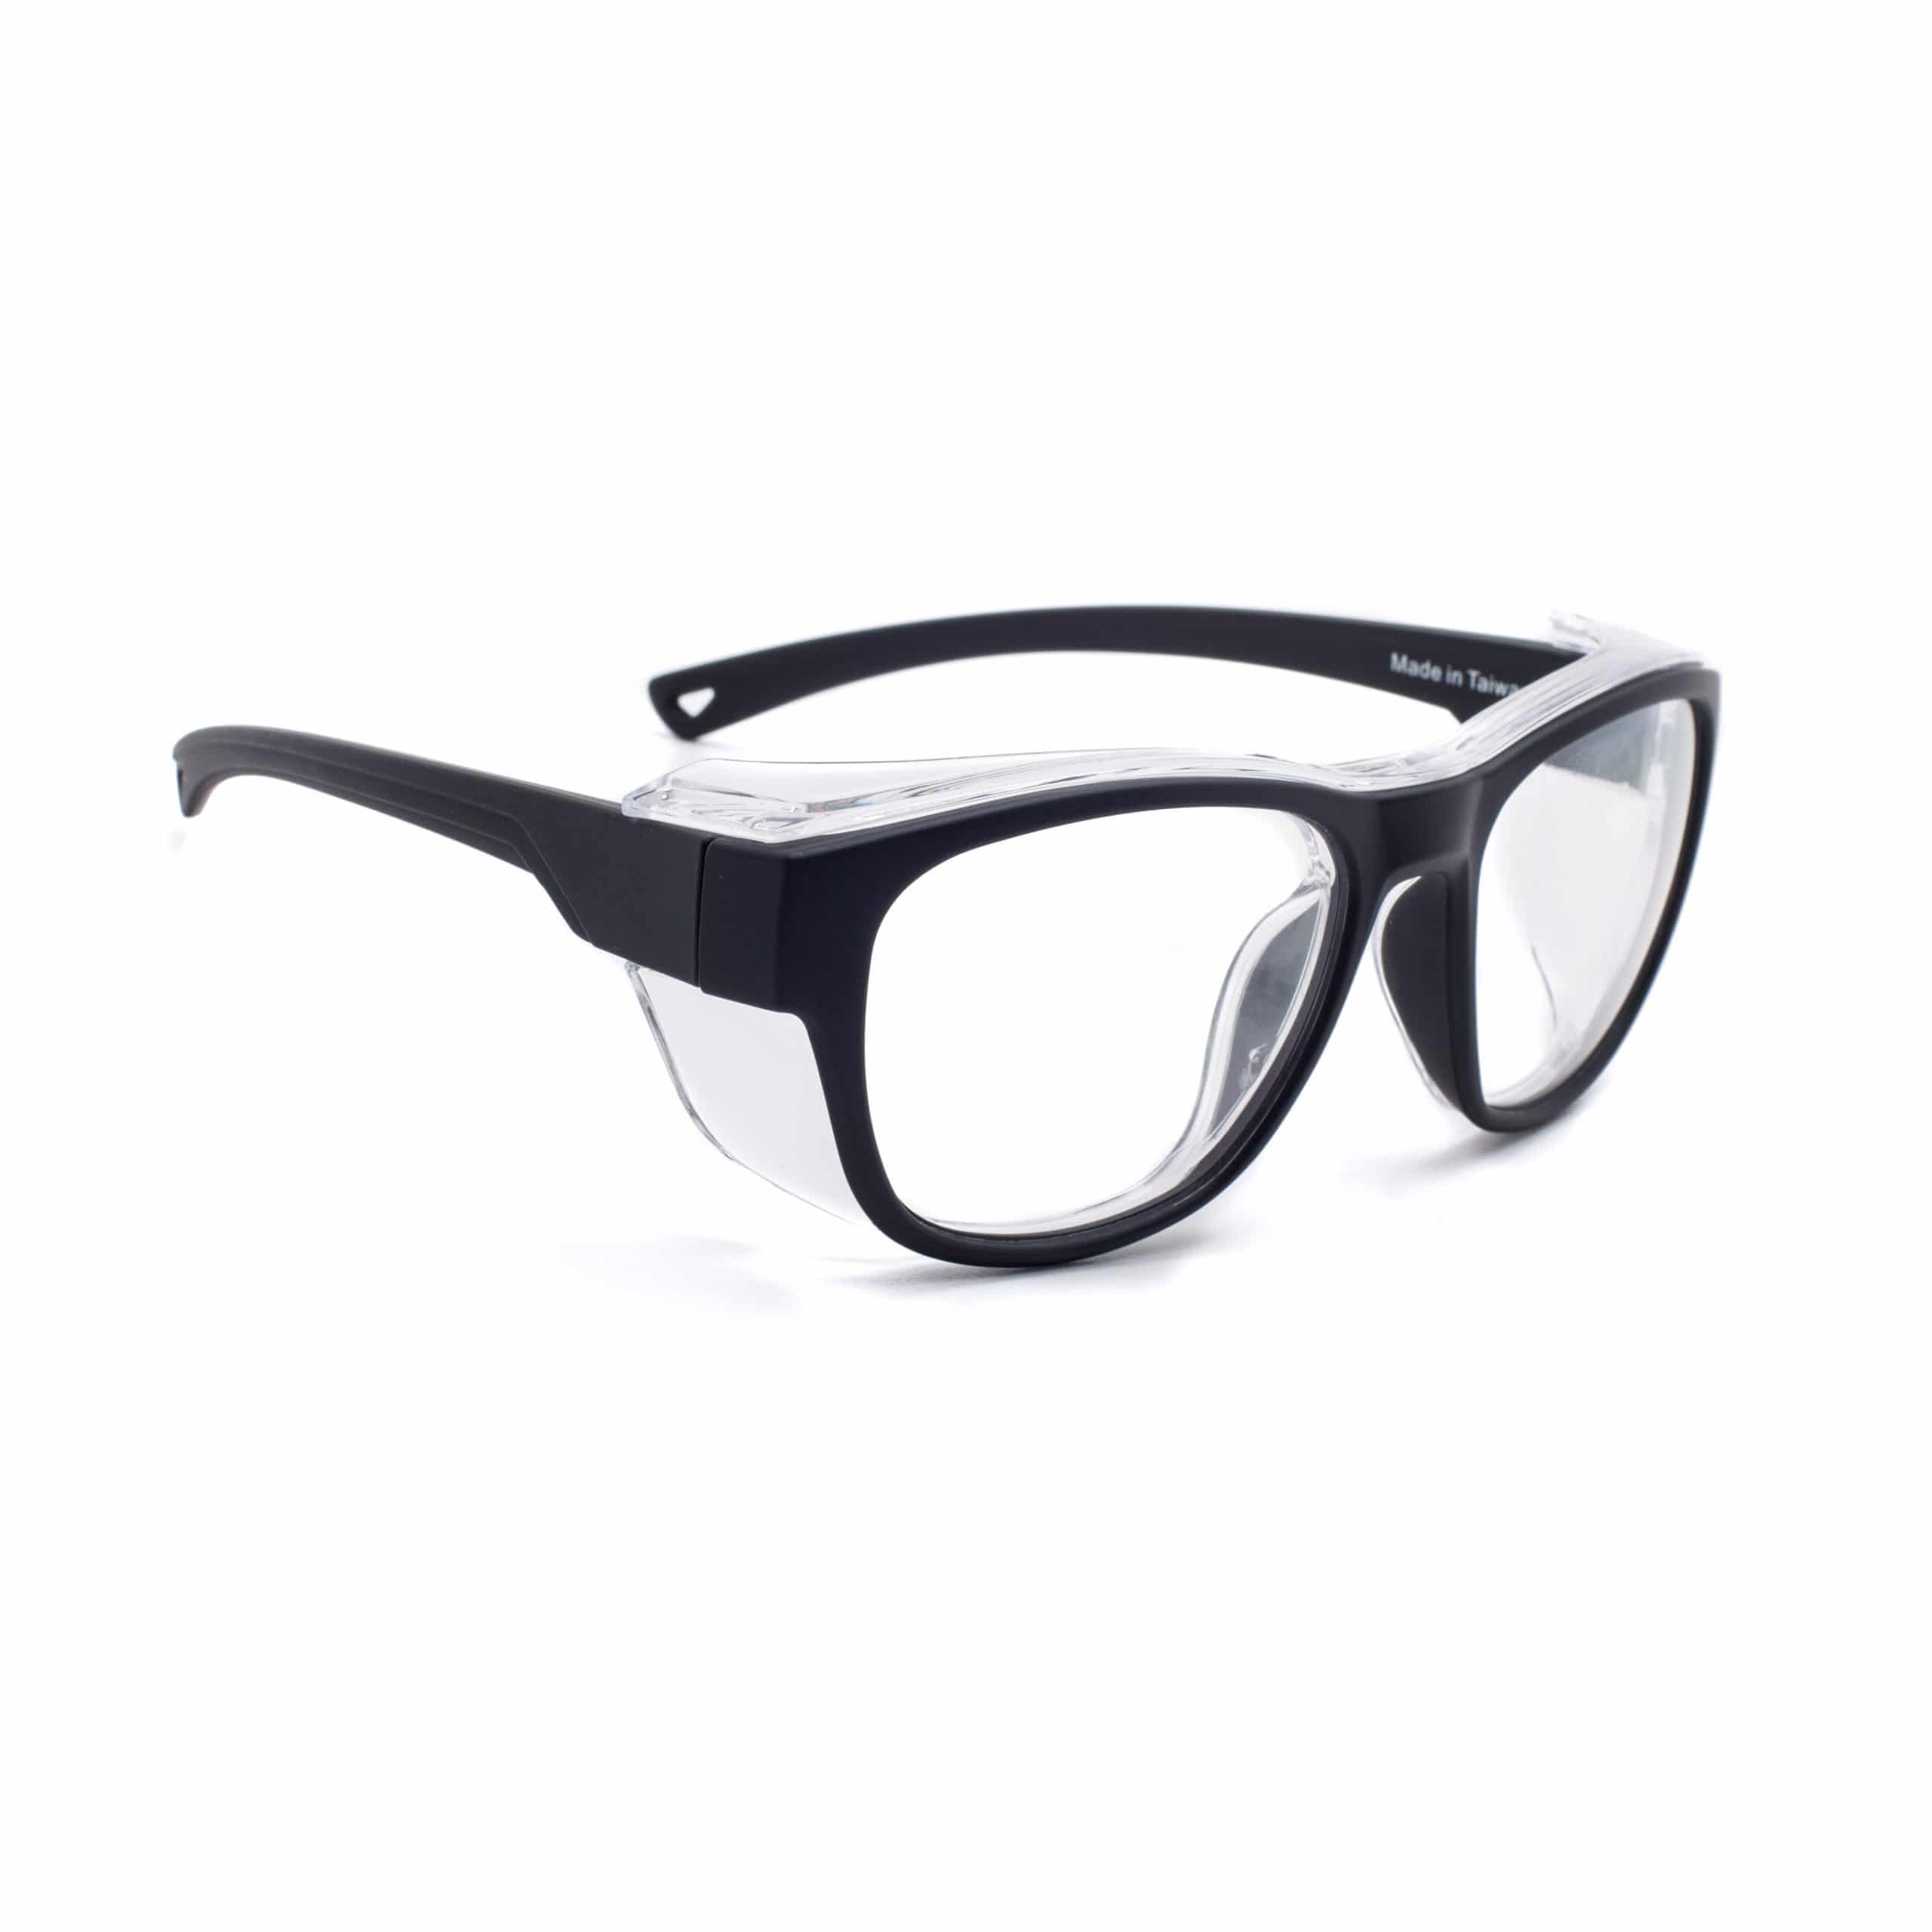 removable side shields - Safety Protection Glasses